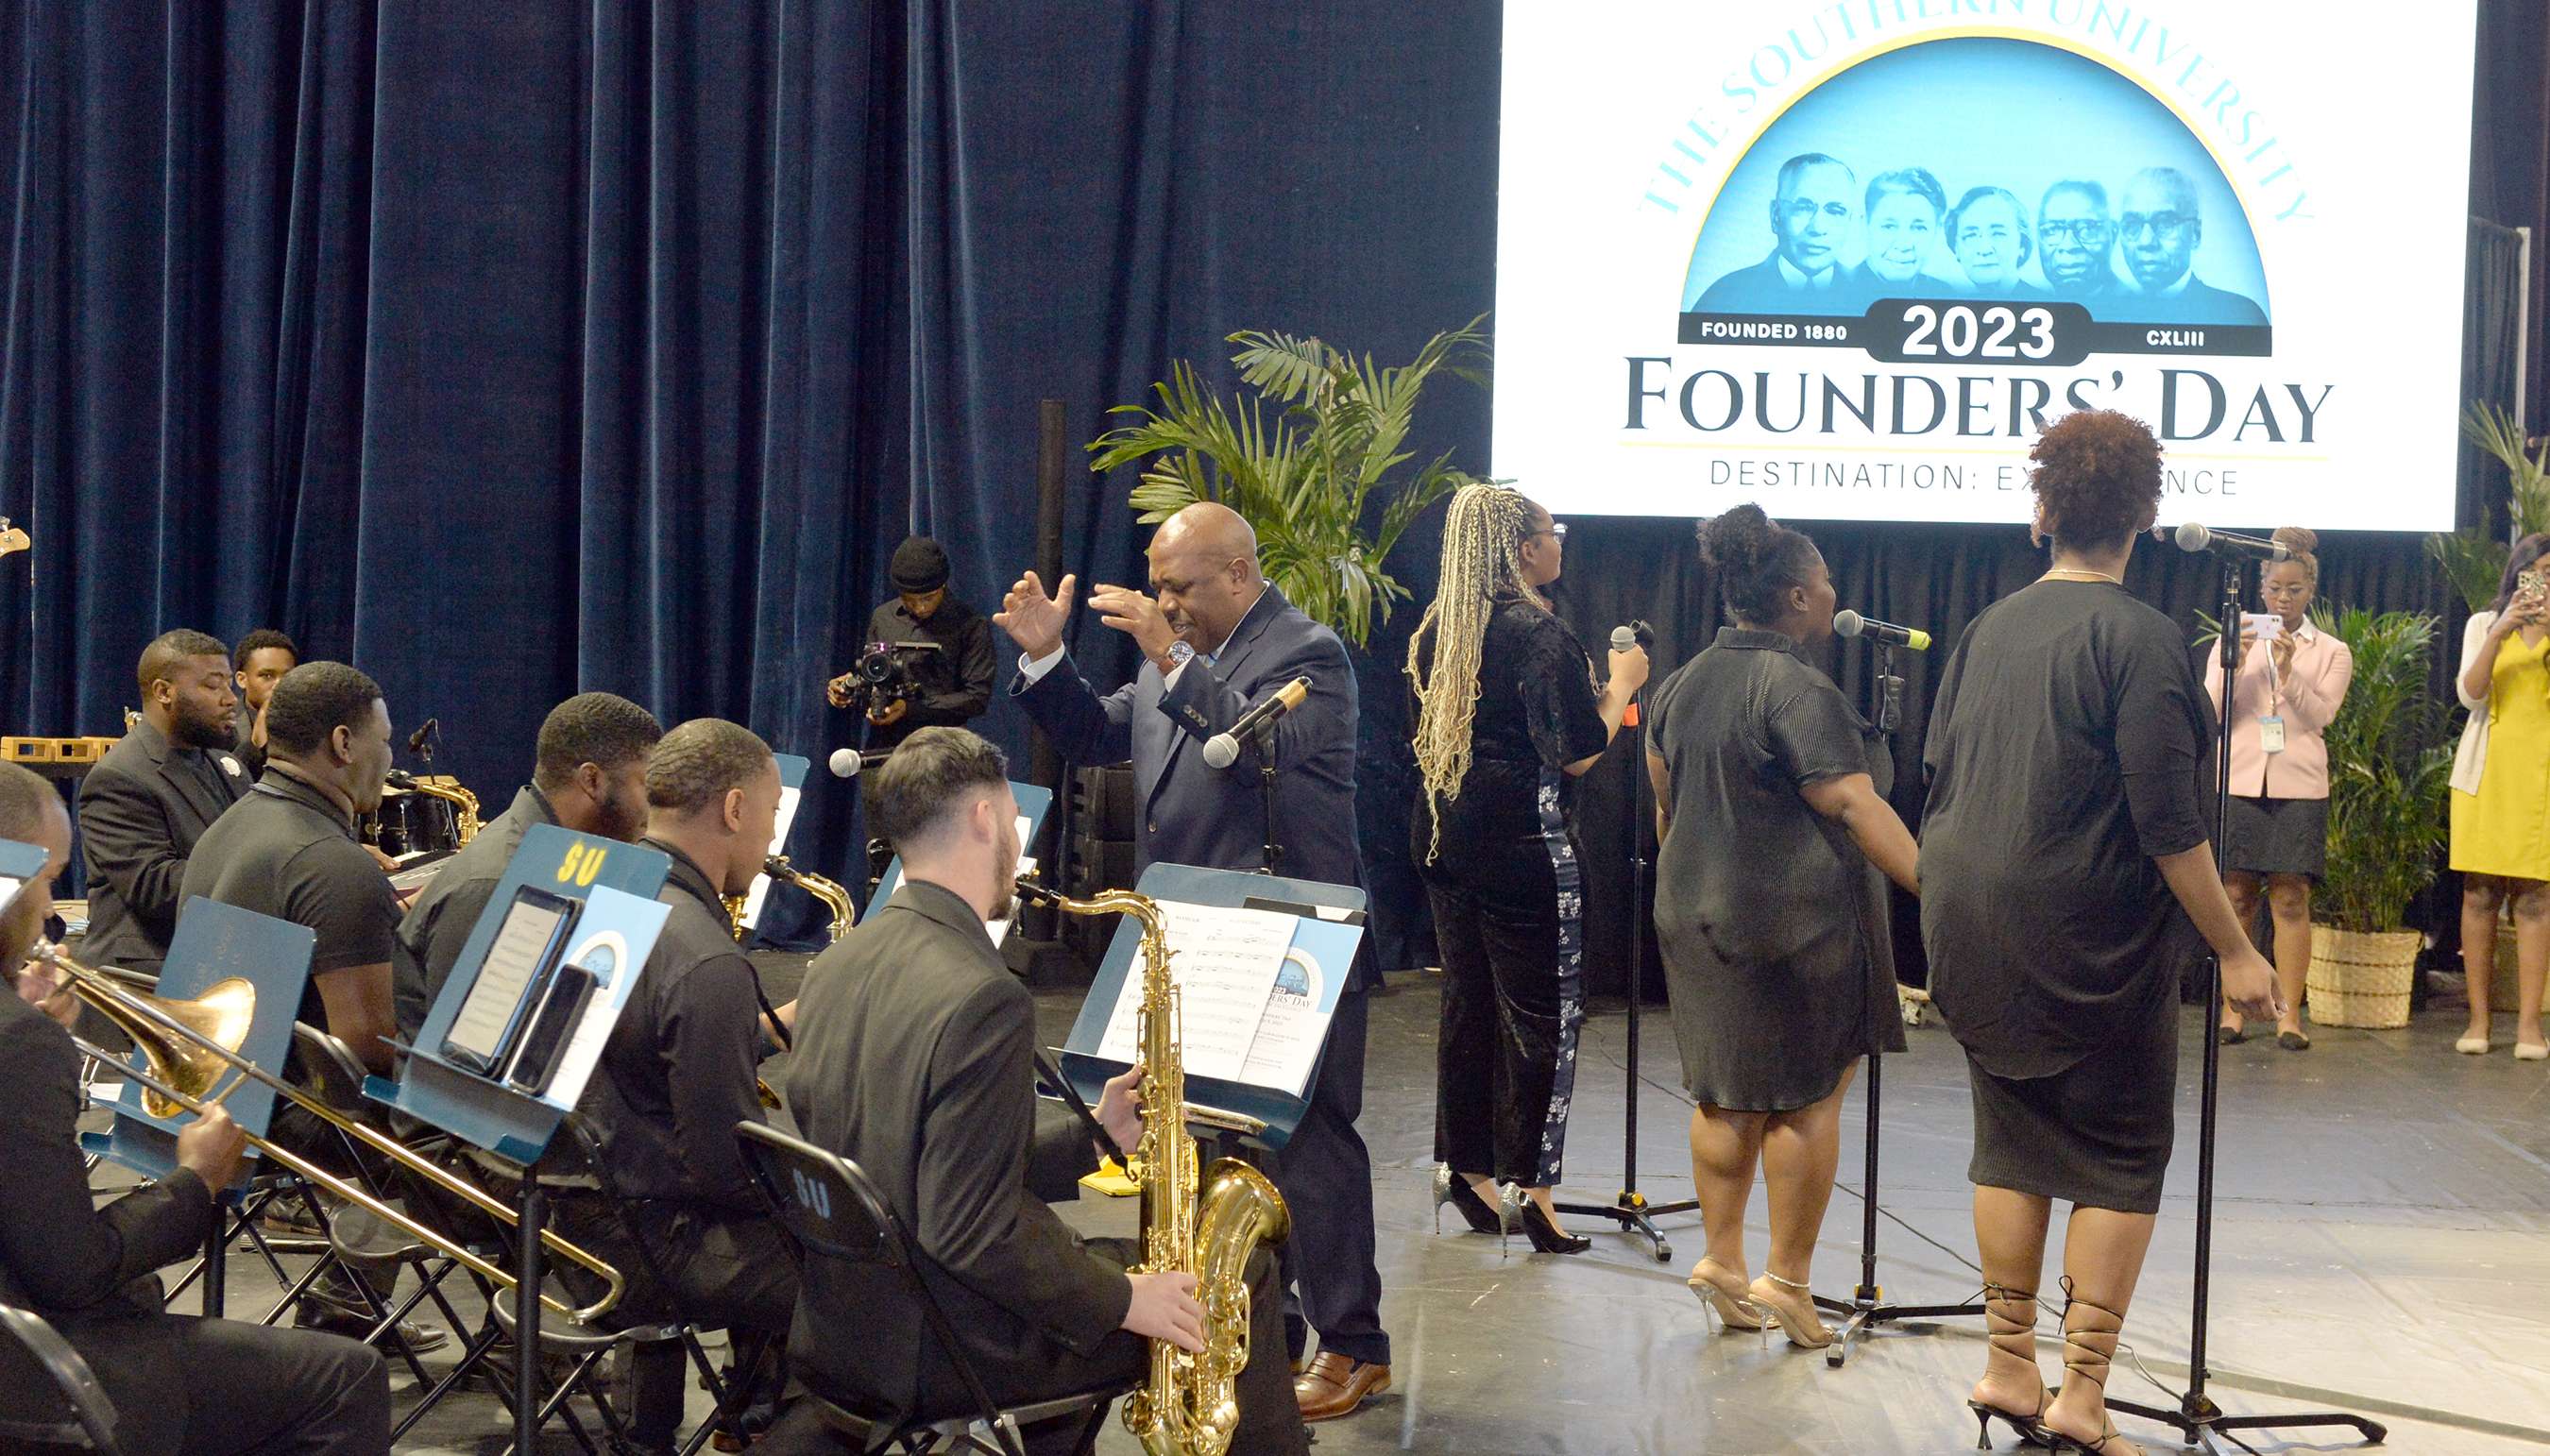 Read SOUTHERN UNIVERSITY FOUNDERS DAY 2023 by Naville Oubre